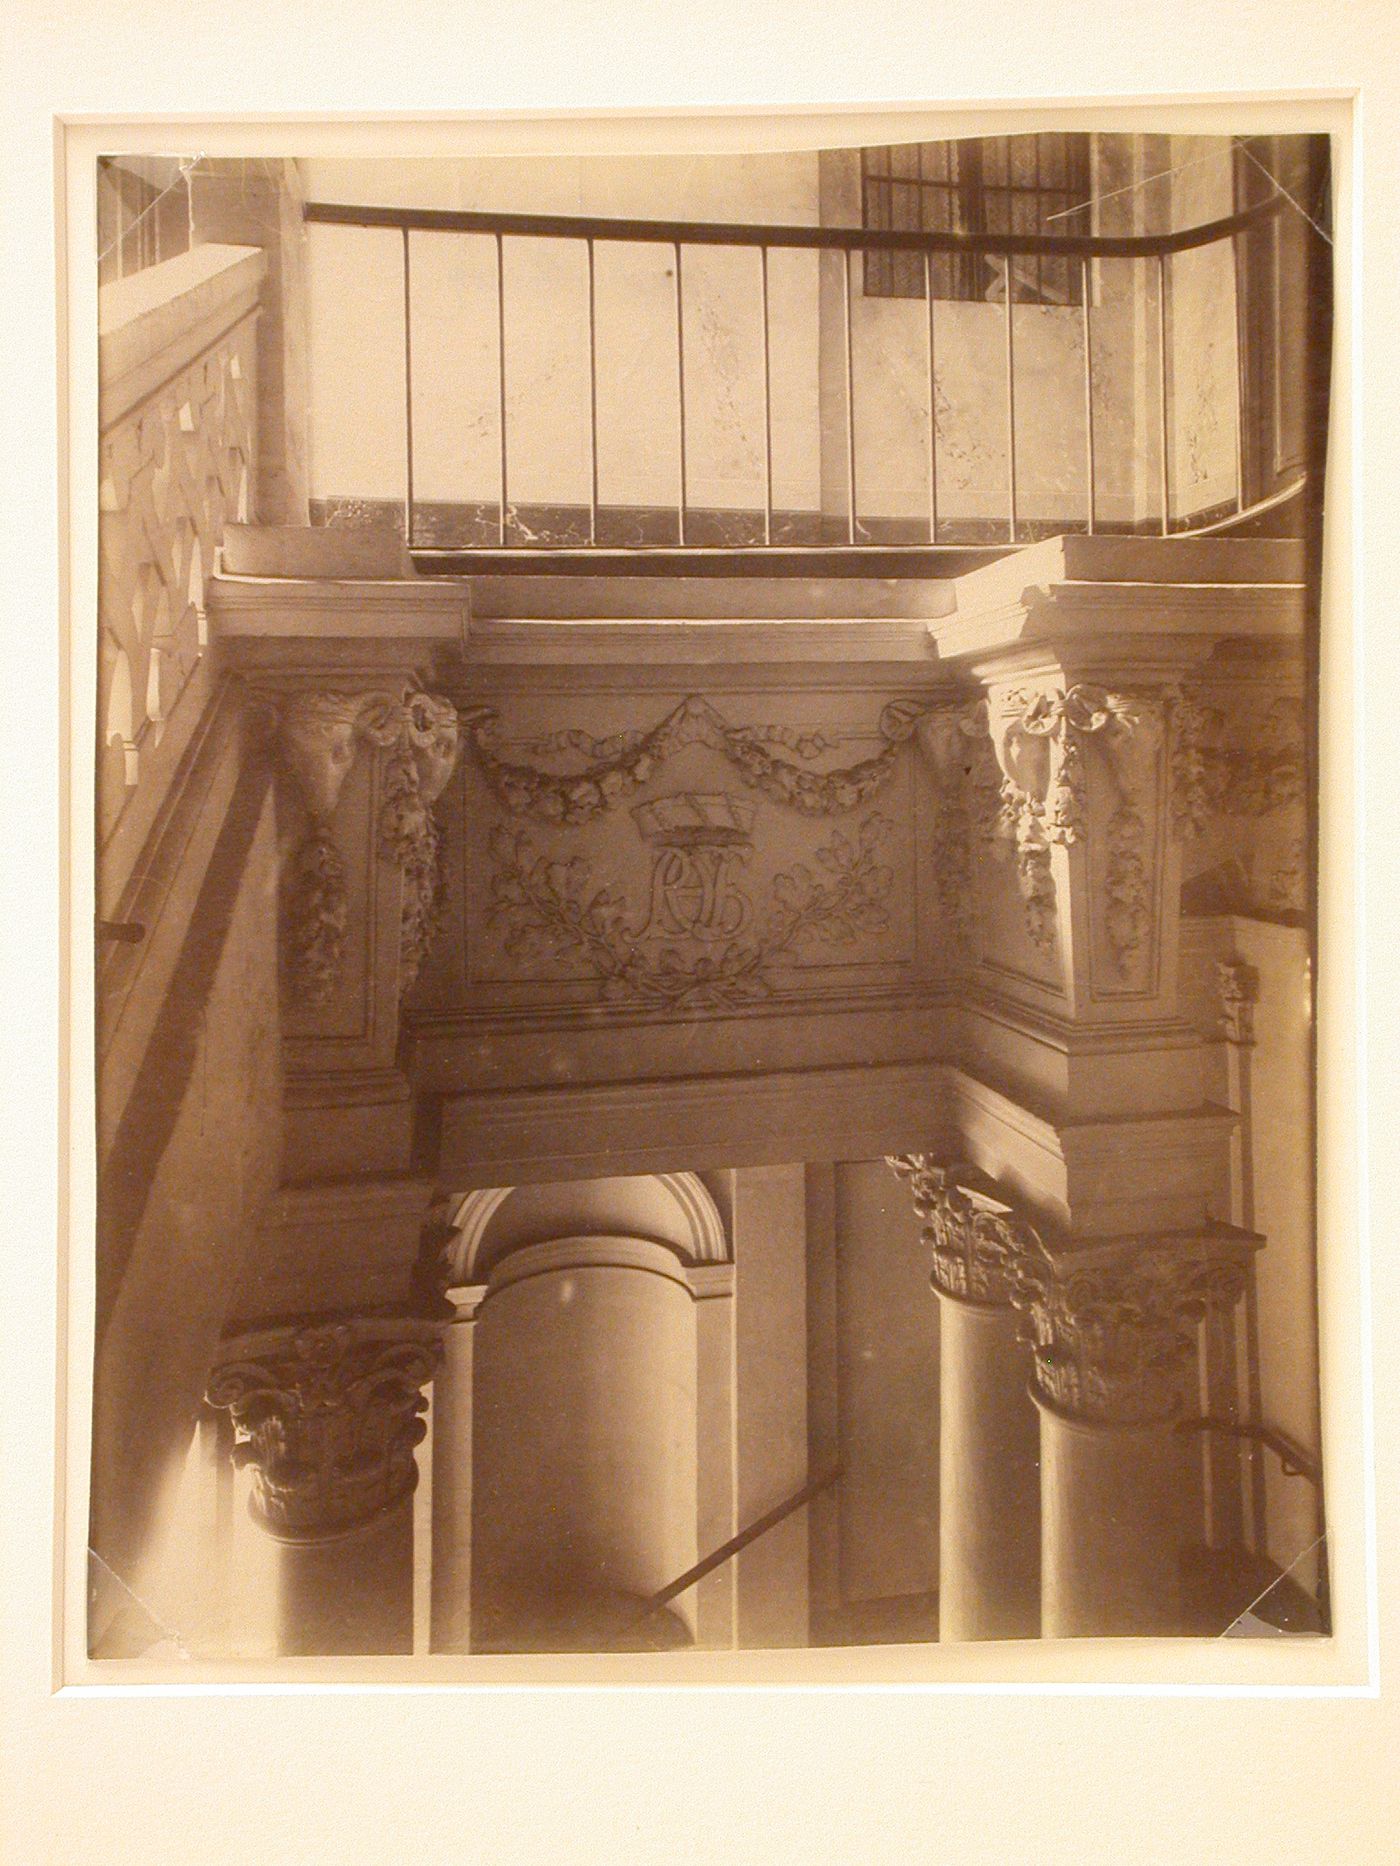 Hôtel de Beauvais: View of second floor with railing looking down to entrance hall below, Paris, France